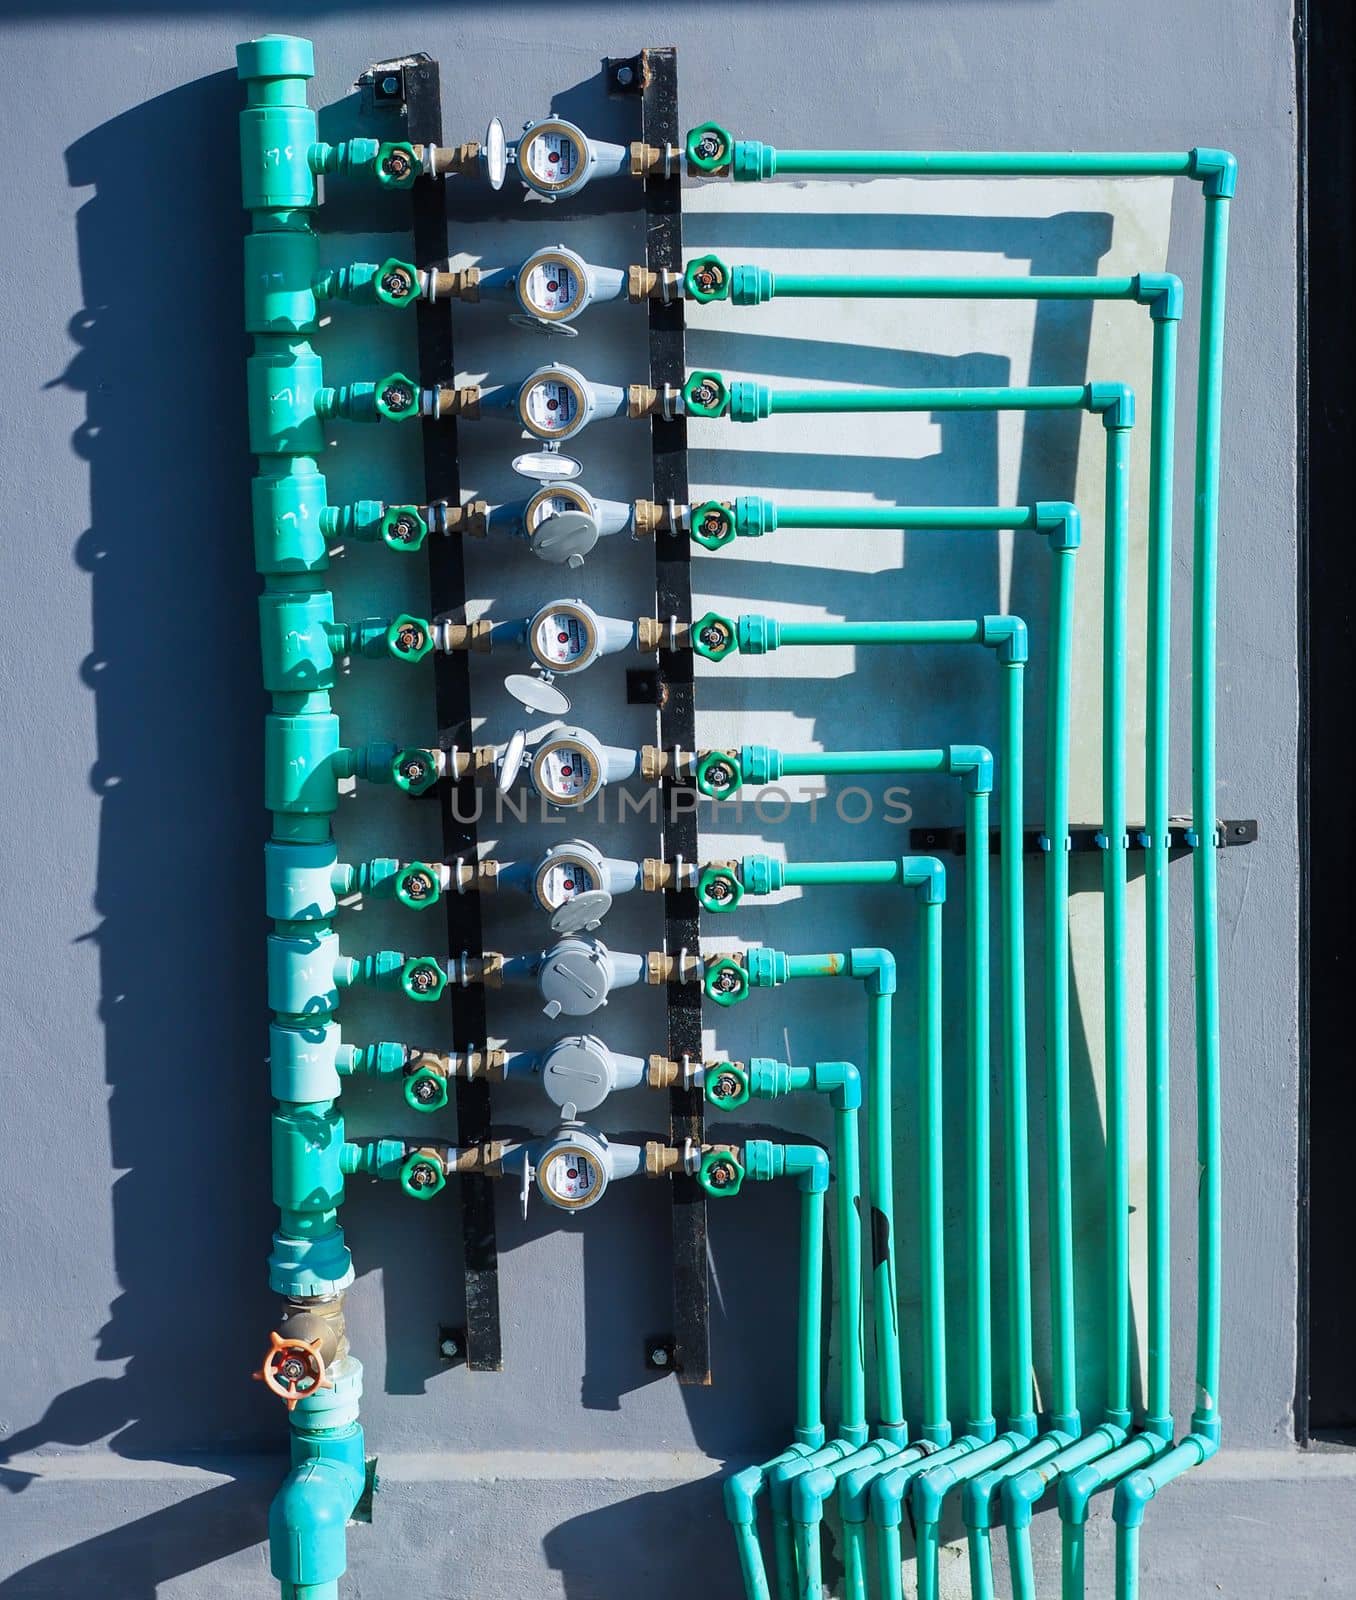 Water meter panels, water valves, and green water pipes arranged on the wall of the building